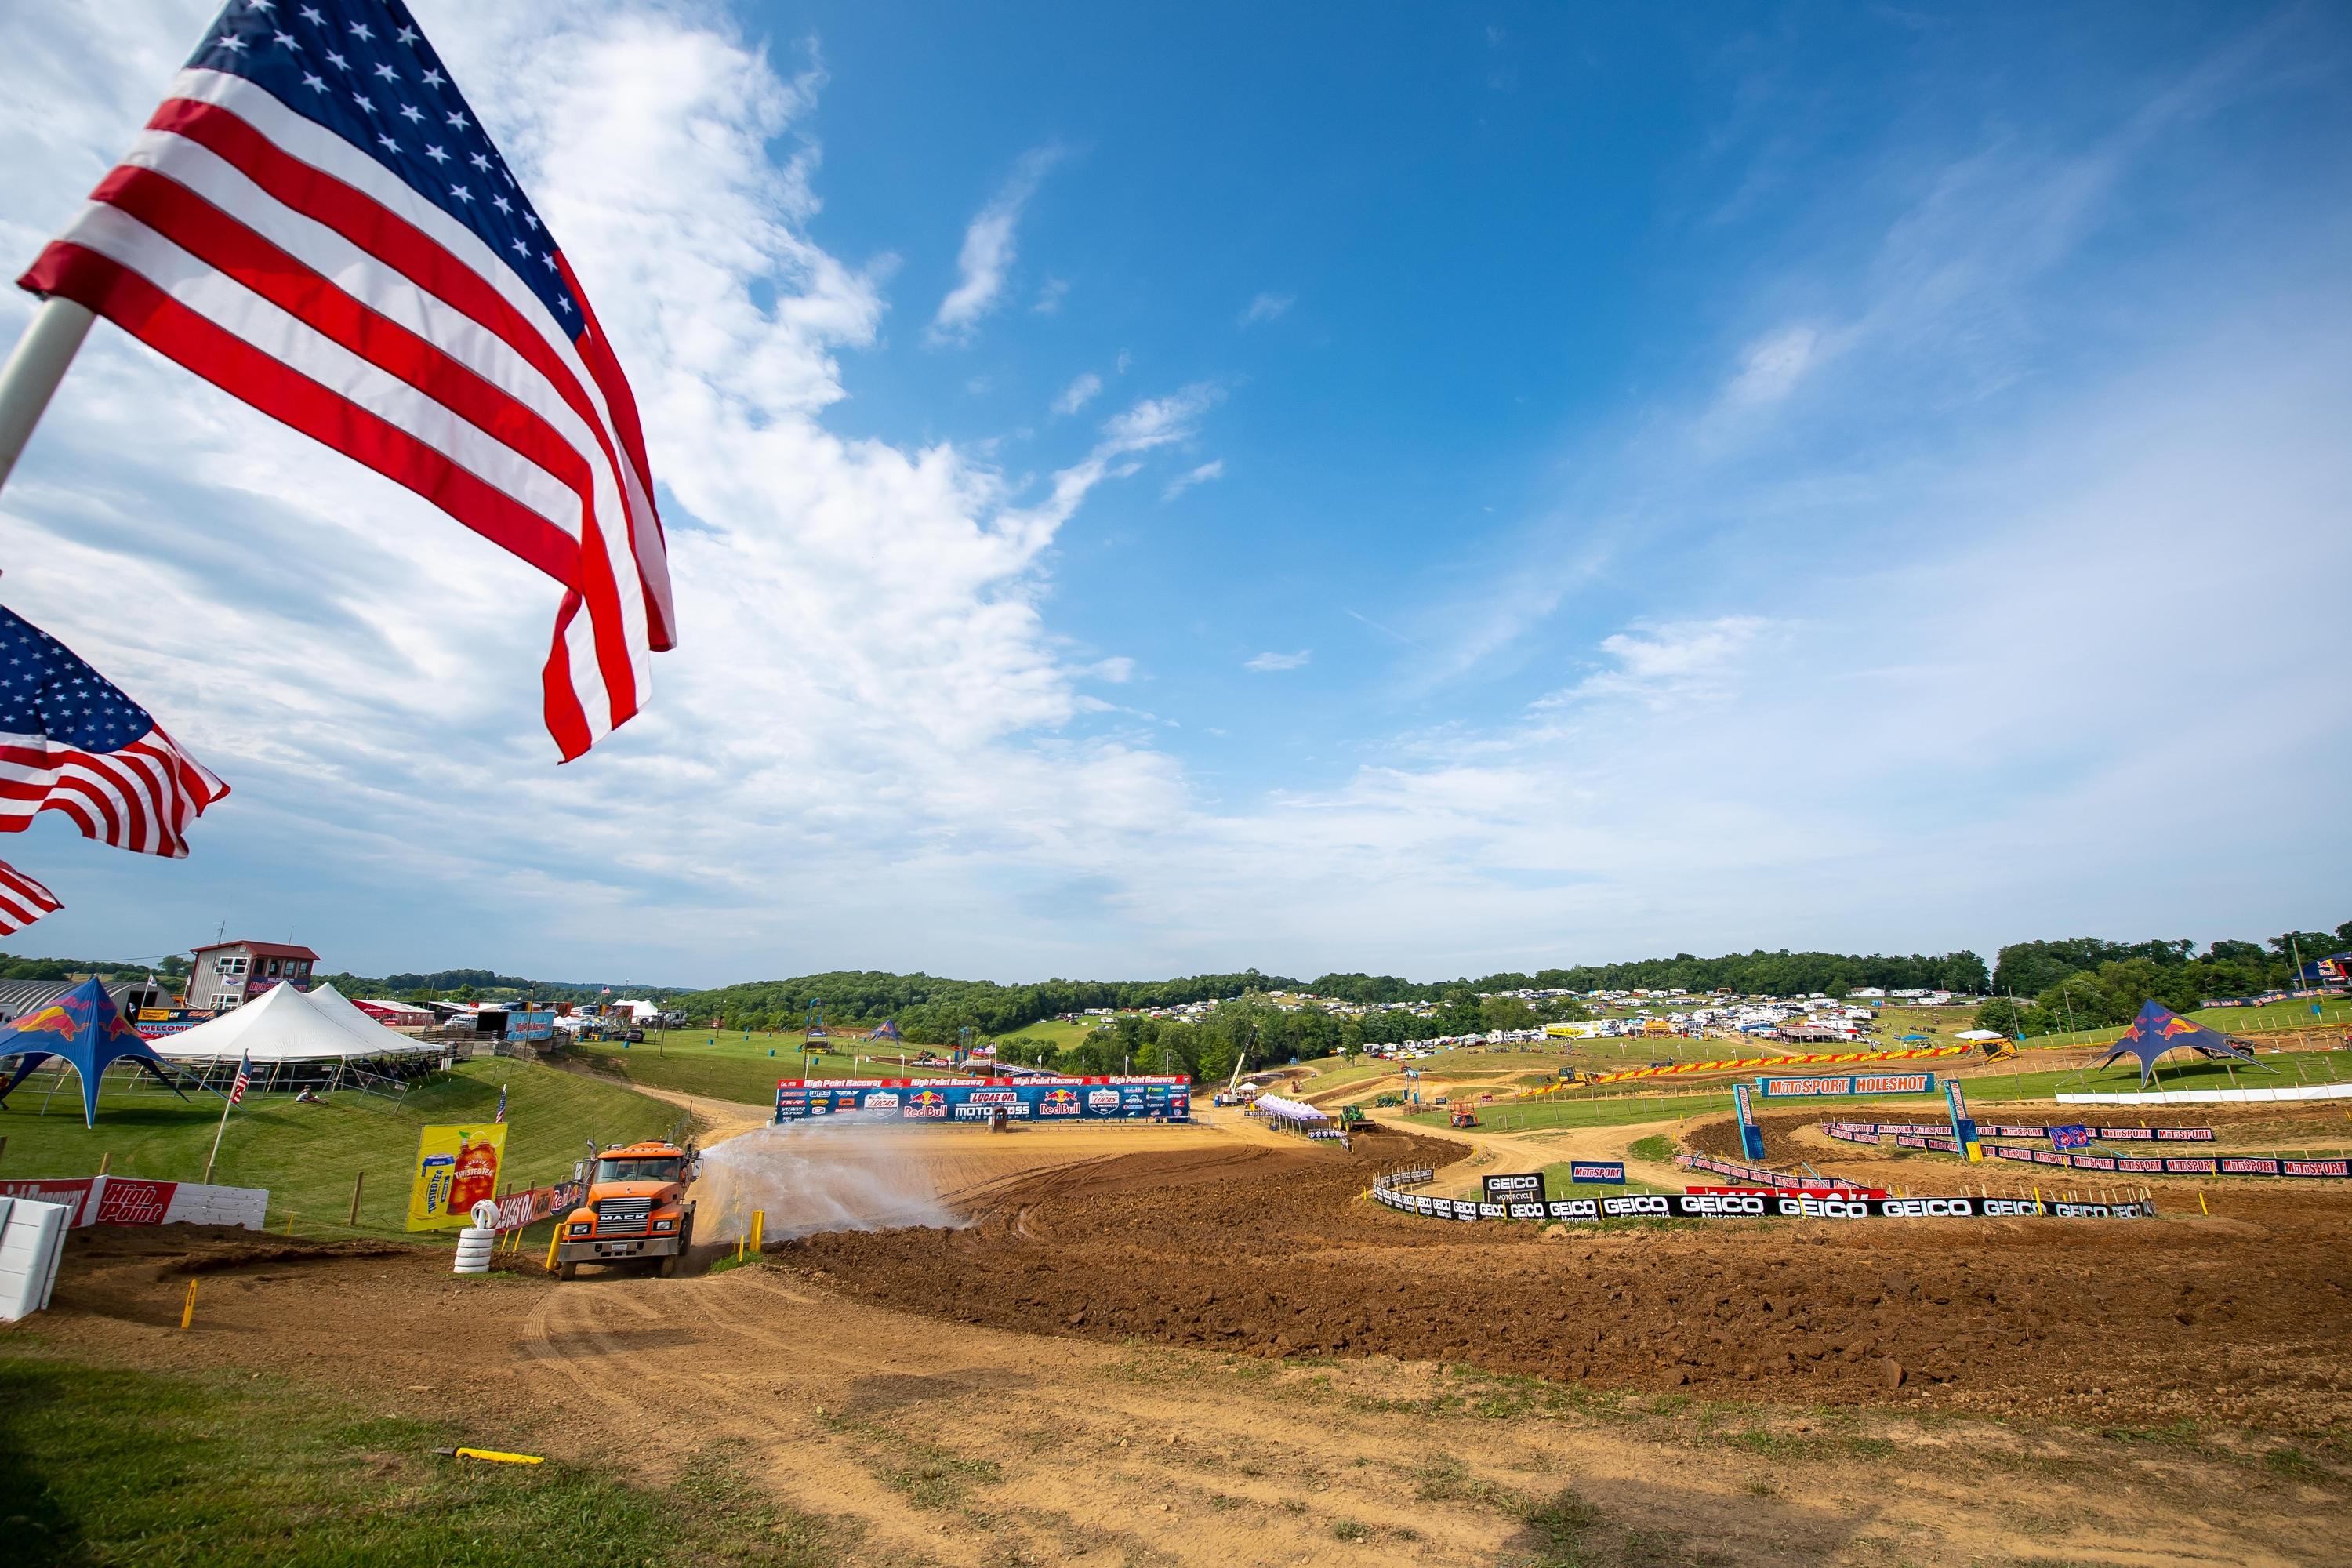 FIM North America Continental Motocross Championship Heads to High Point Raceway in the United States and Moto Park in Canada